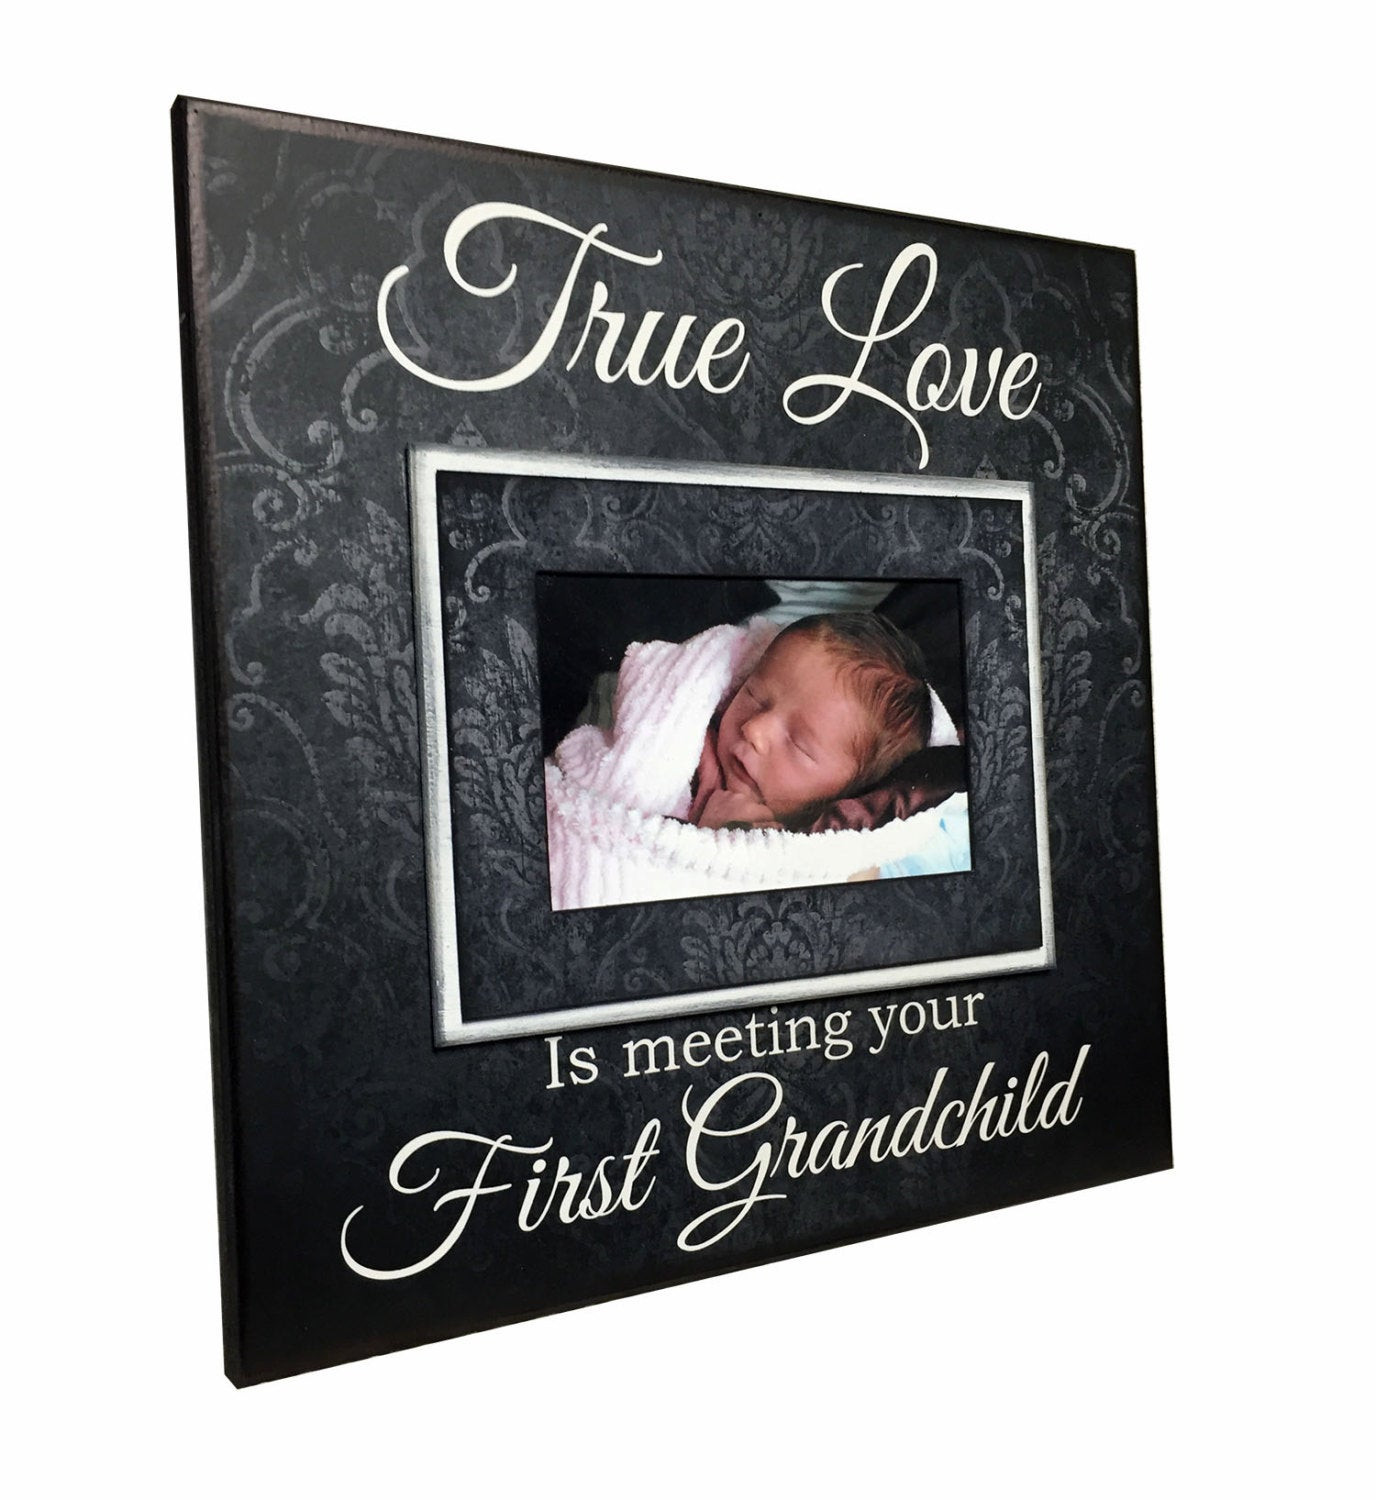 Grandmother Gifts From Baby
 New Grandparent Gift Picture Frame For Grandmother